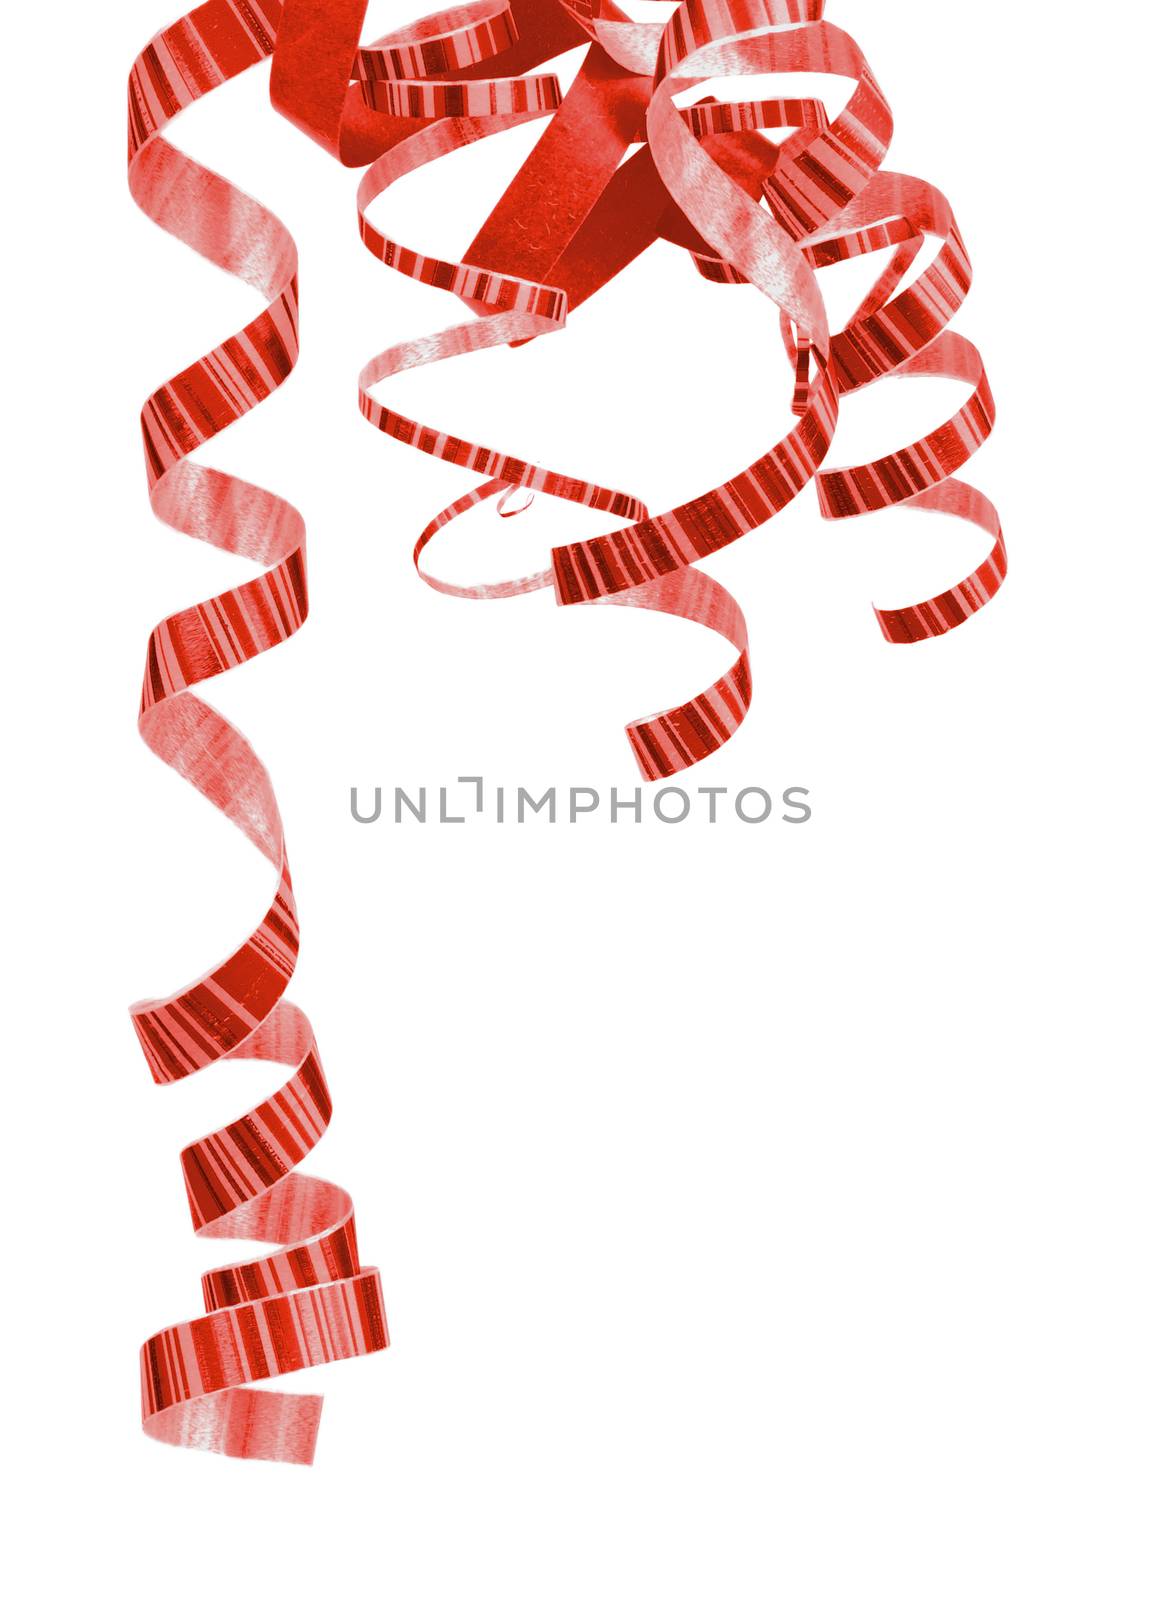 Corner of Striped Red Curly Hanging Down Party Streamers isolated on white background